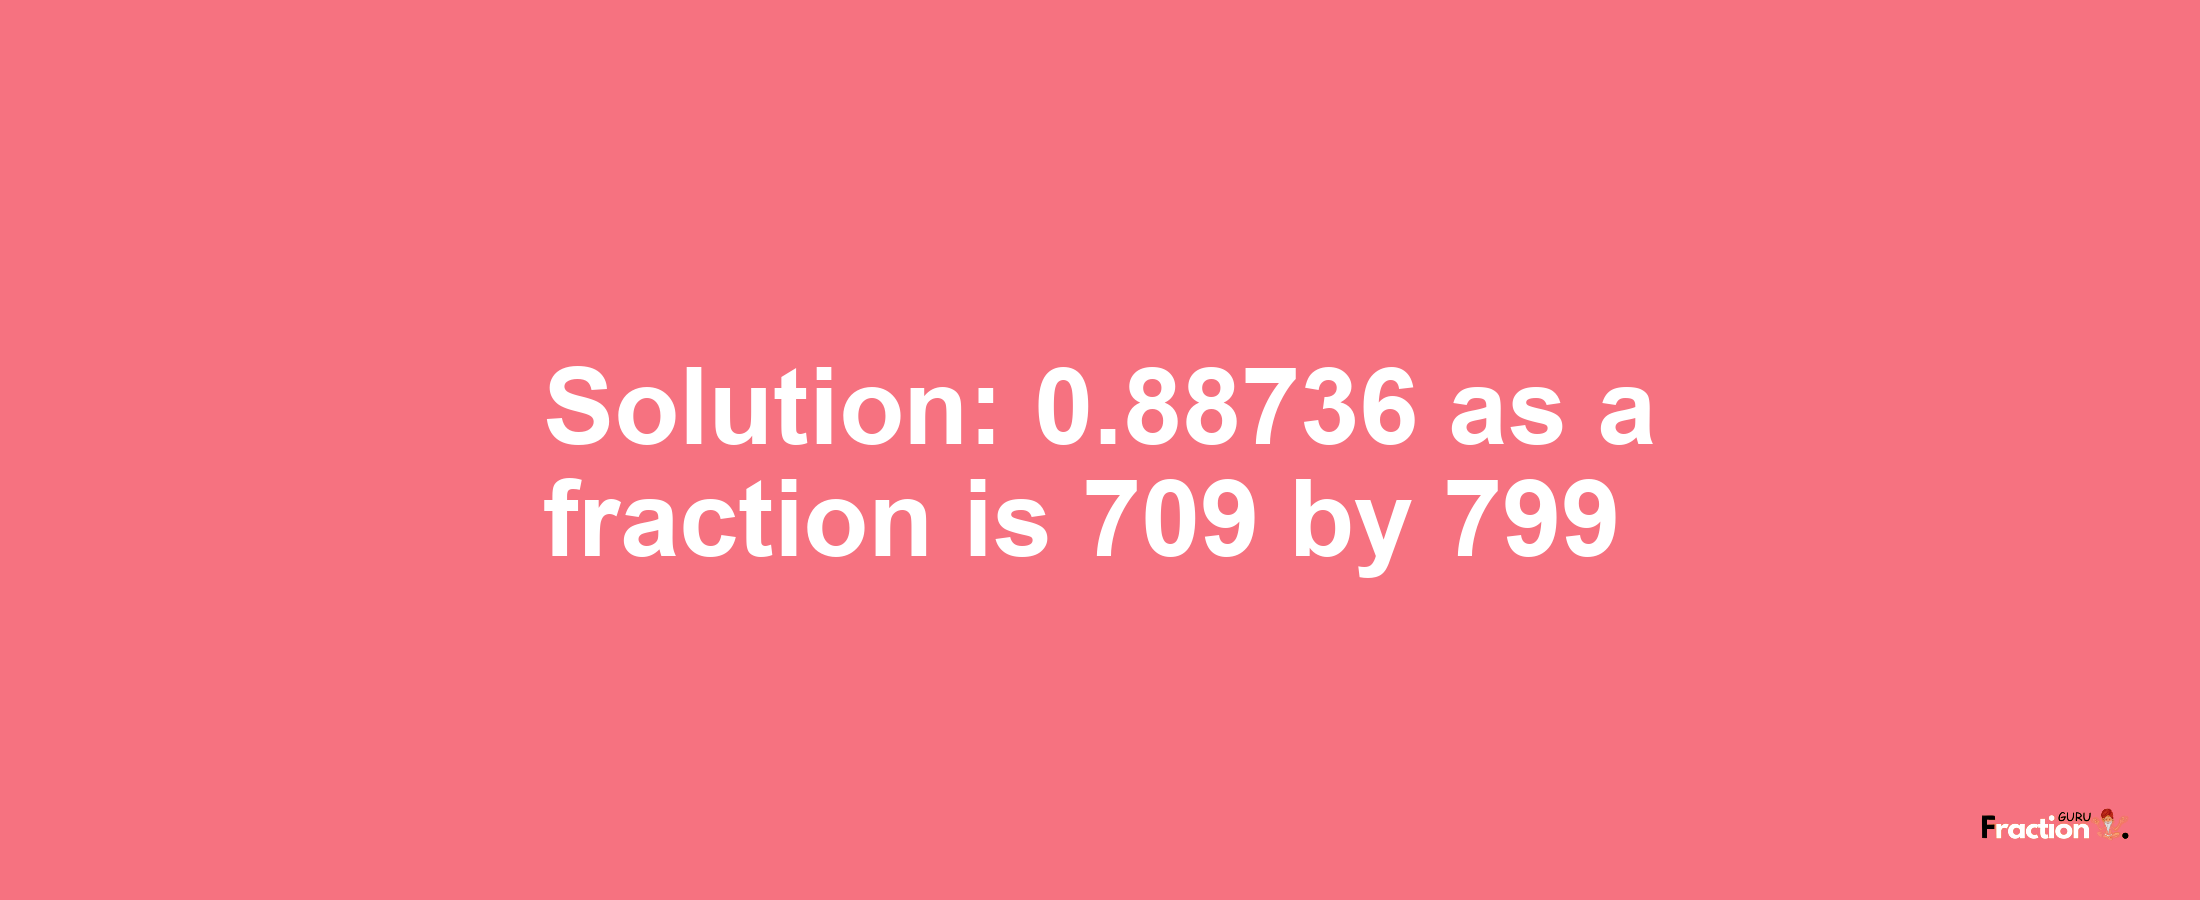 Solution:0.88736 as a fraction is 709/799